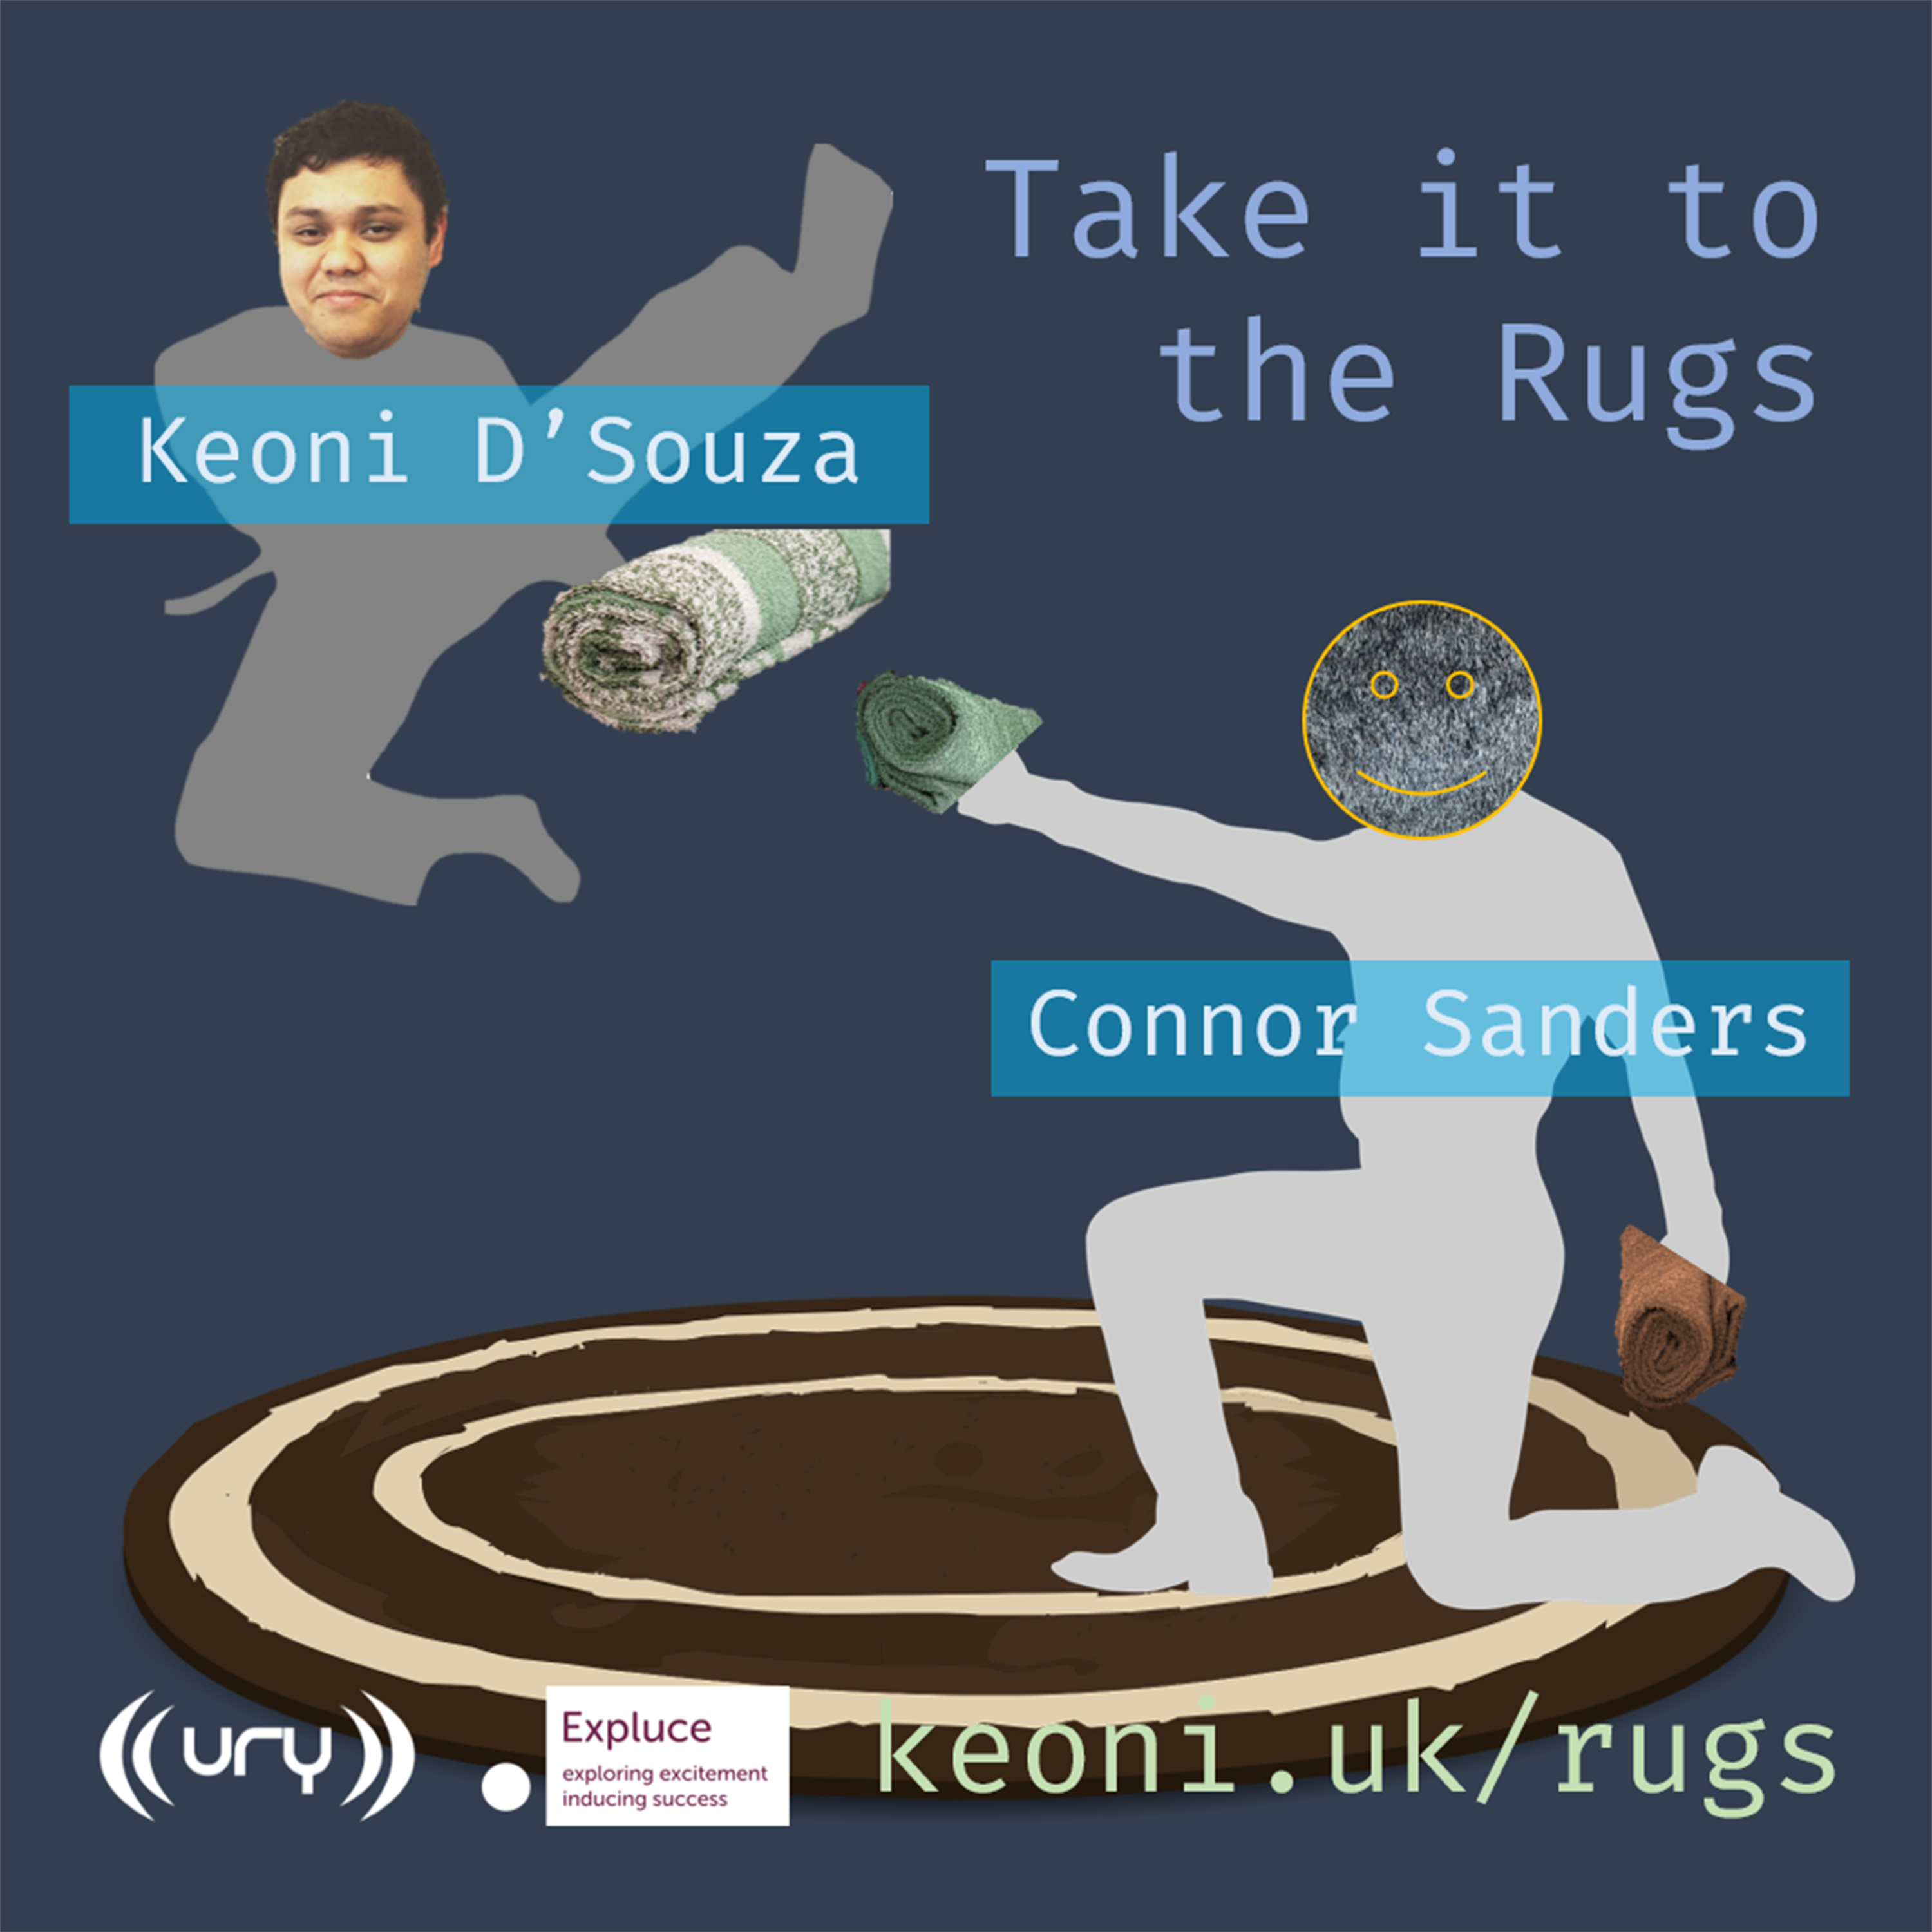 Take it to the Rugs logo.